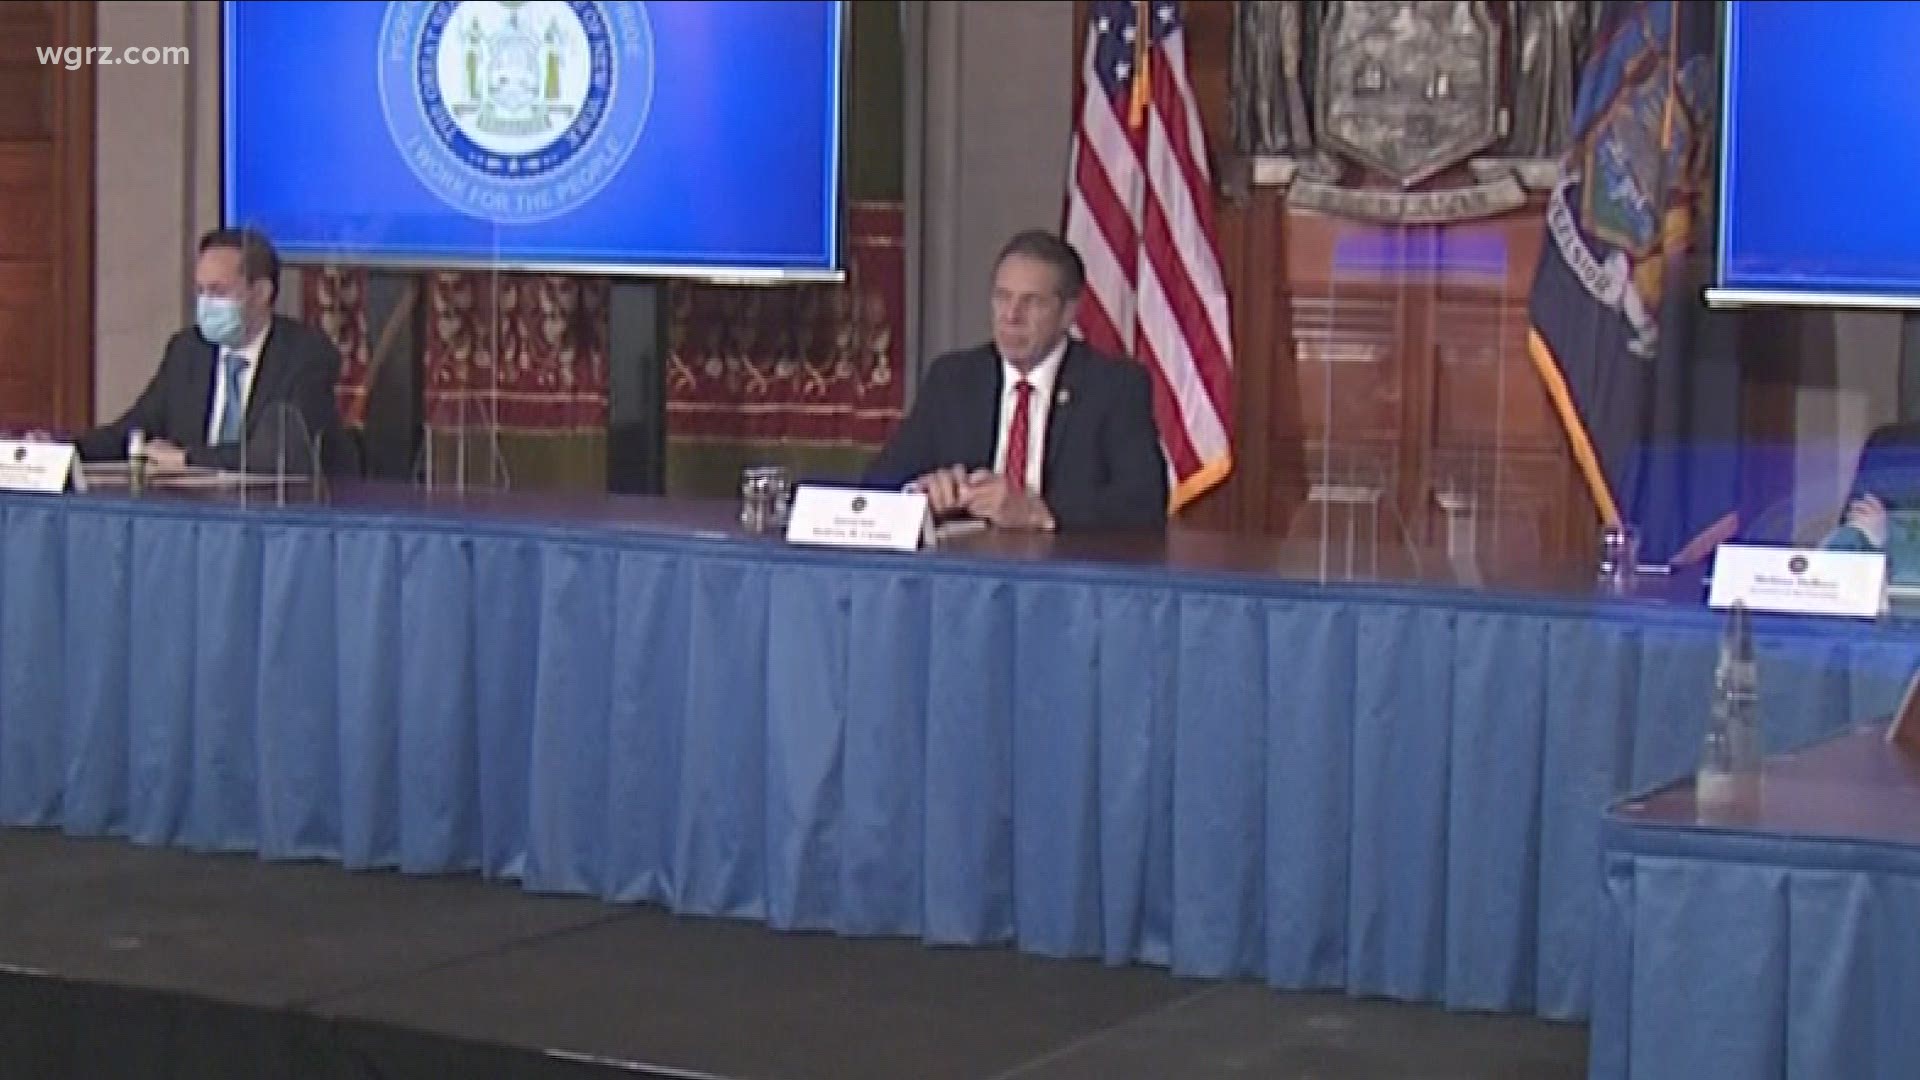 Governor Cuomo: state to share contact tracing data